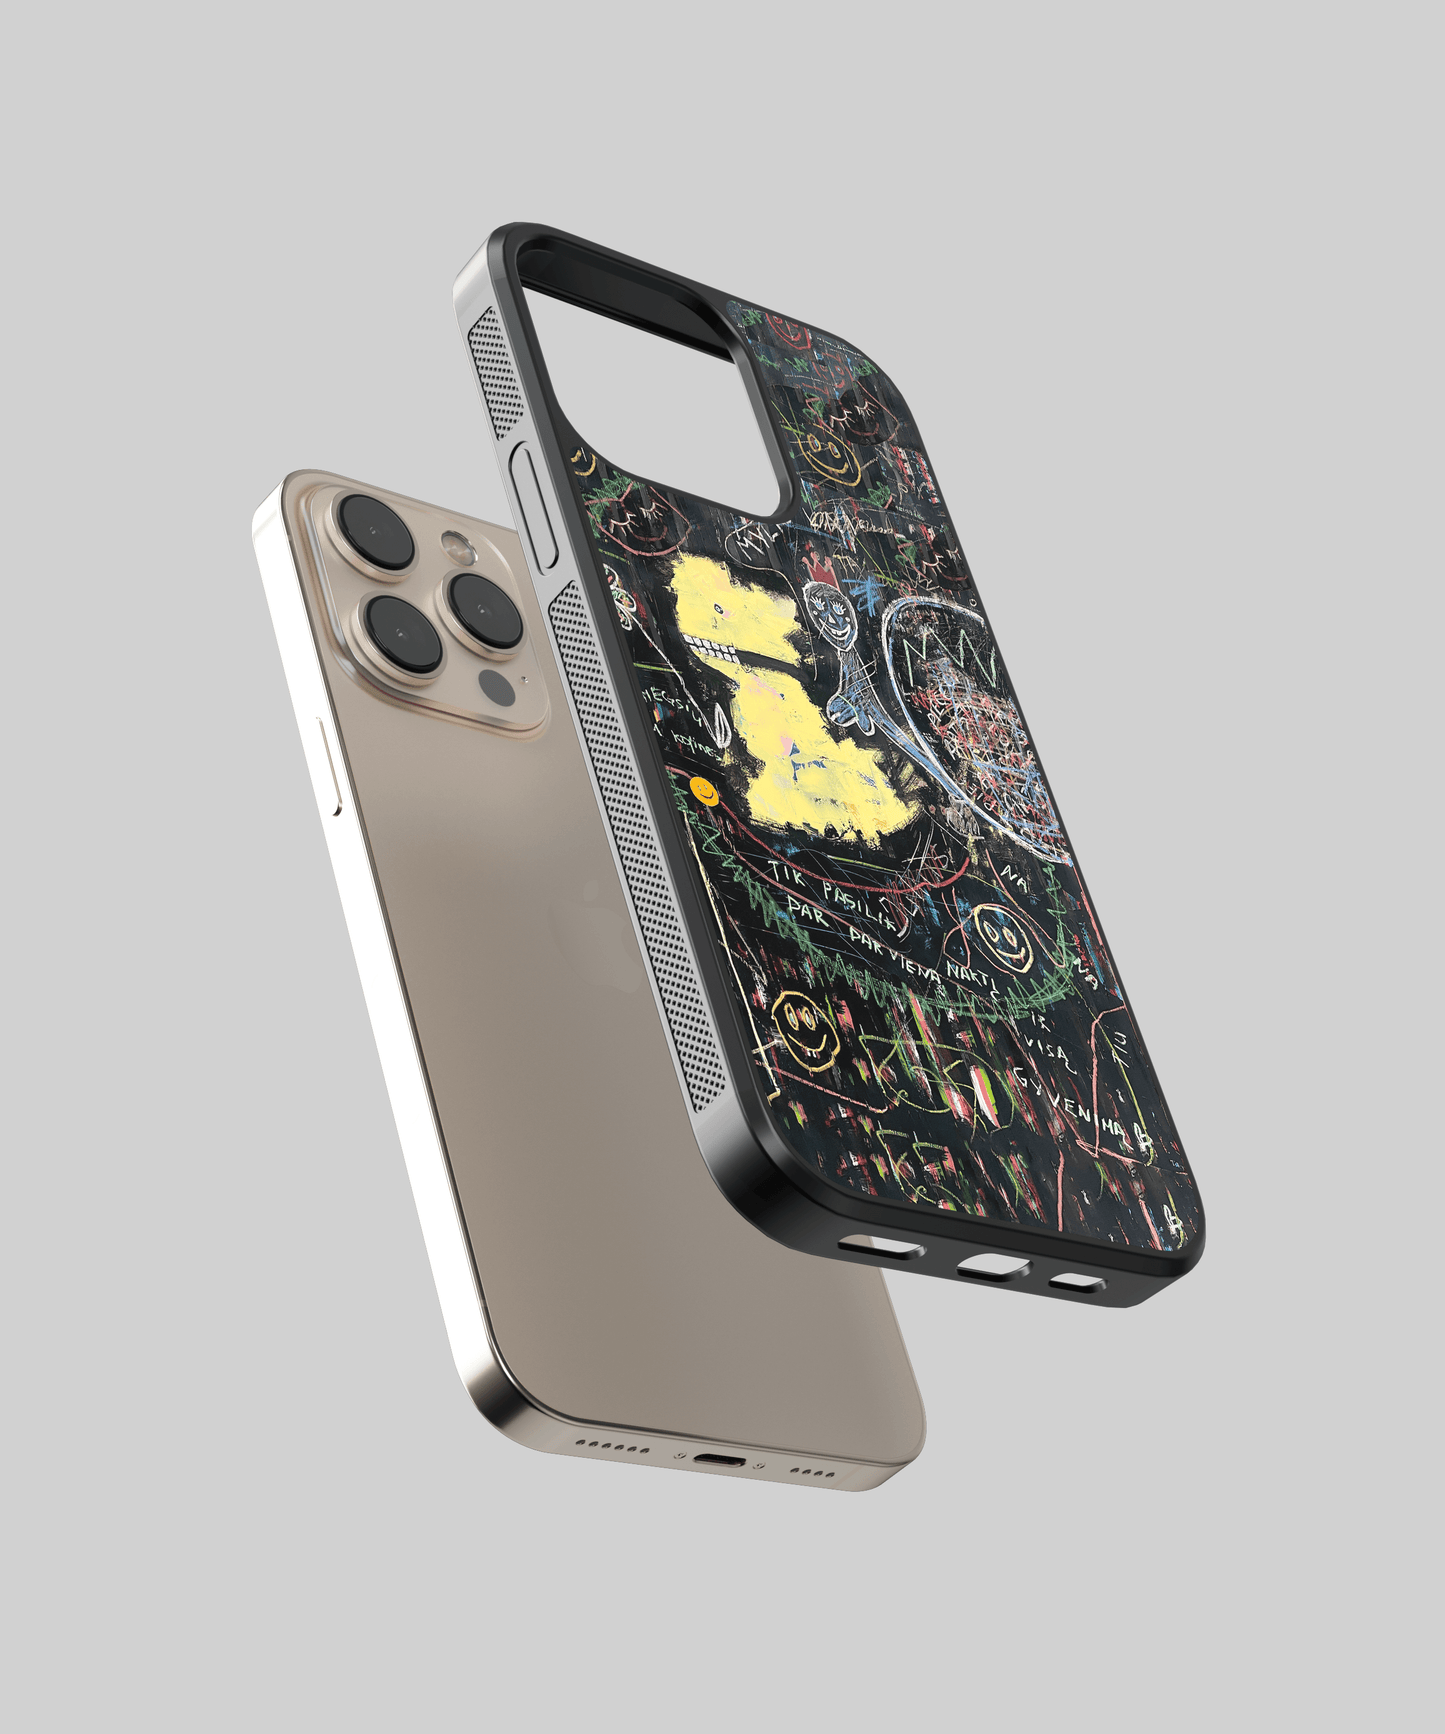 Just stay - iPhone 11 phone case